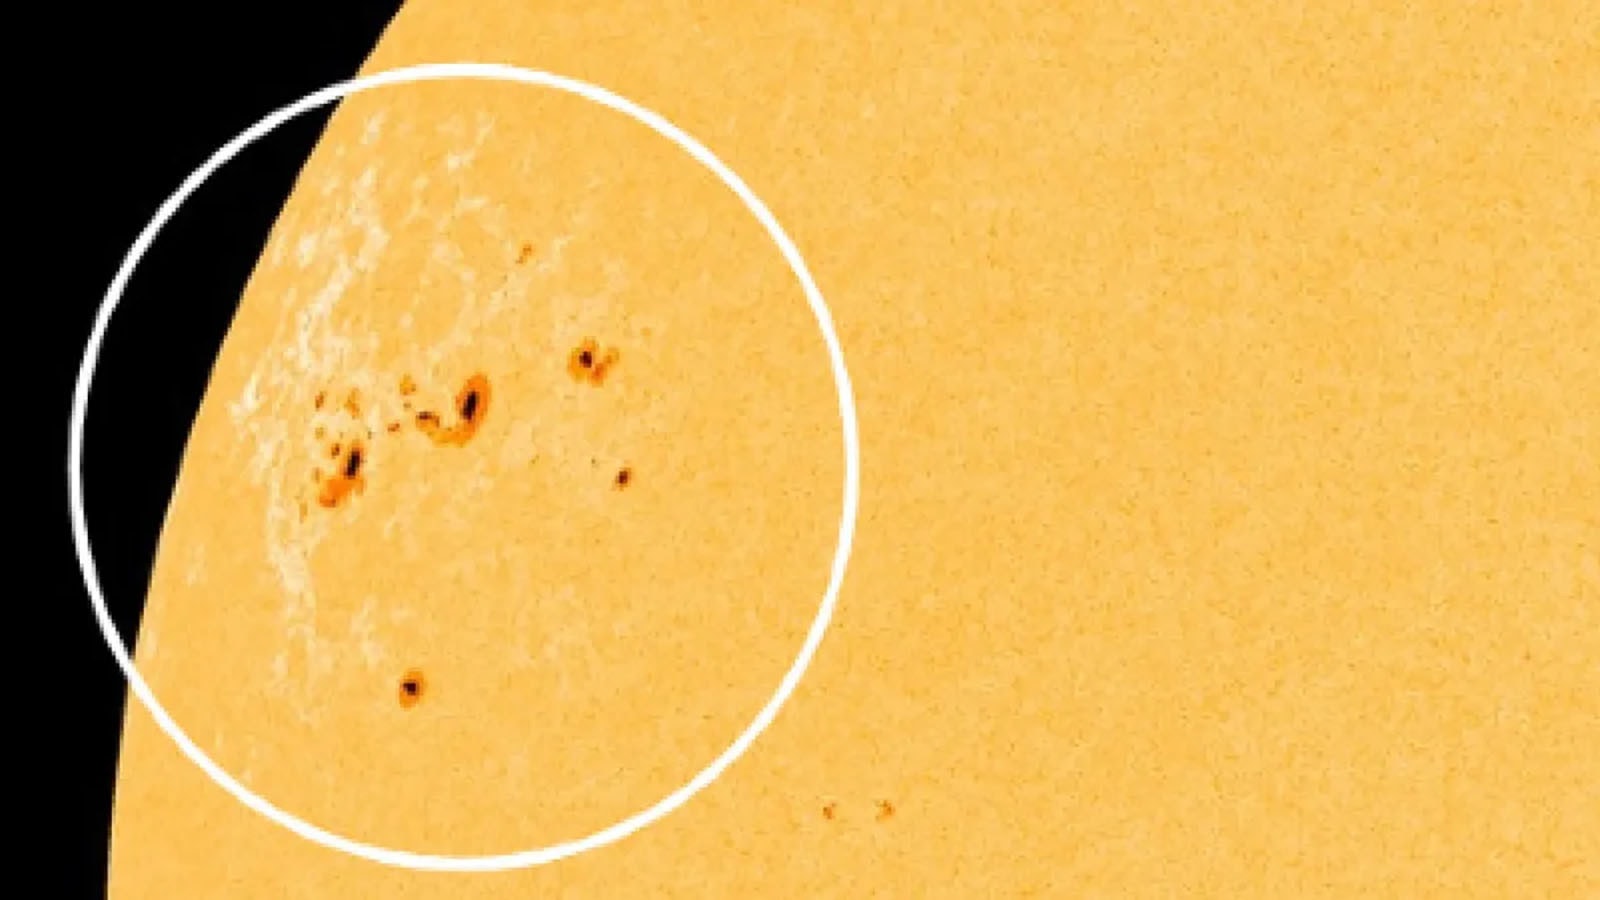 A giant sunspot archipelago, or a collection of sunspots, on the surface of the sun covers an area more than 15 times the width of Earth.